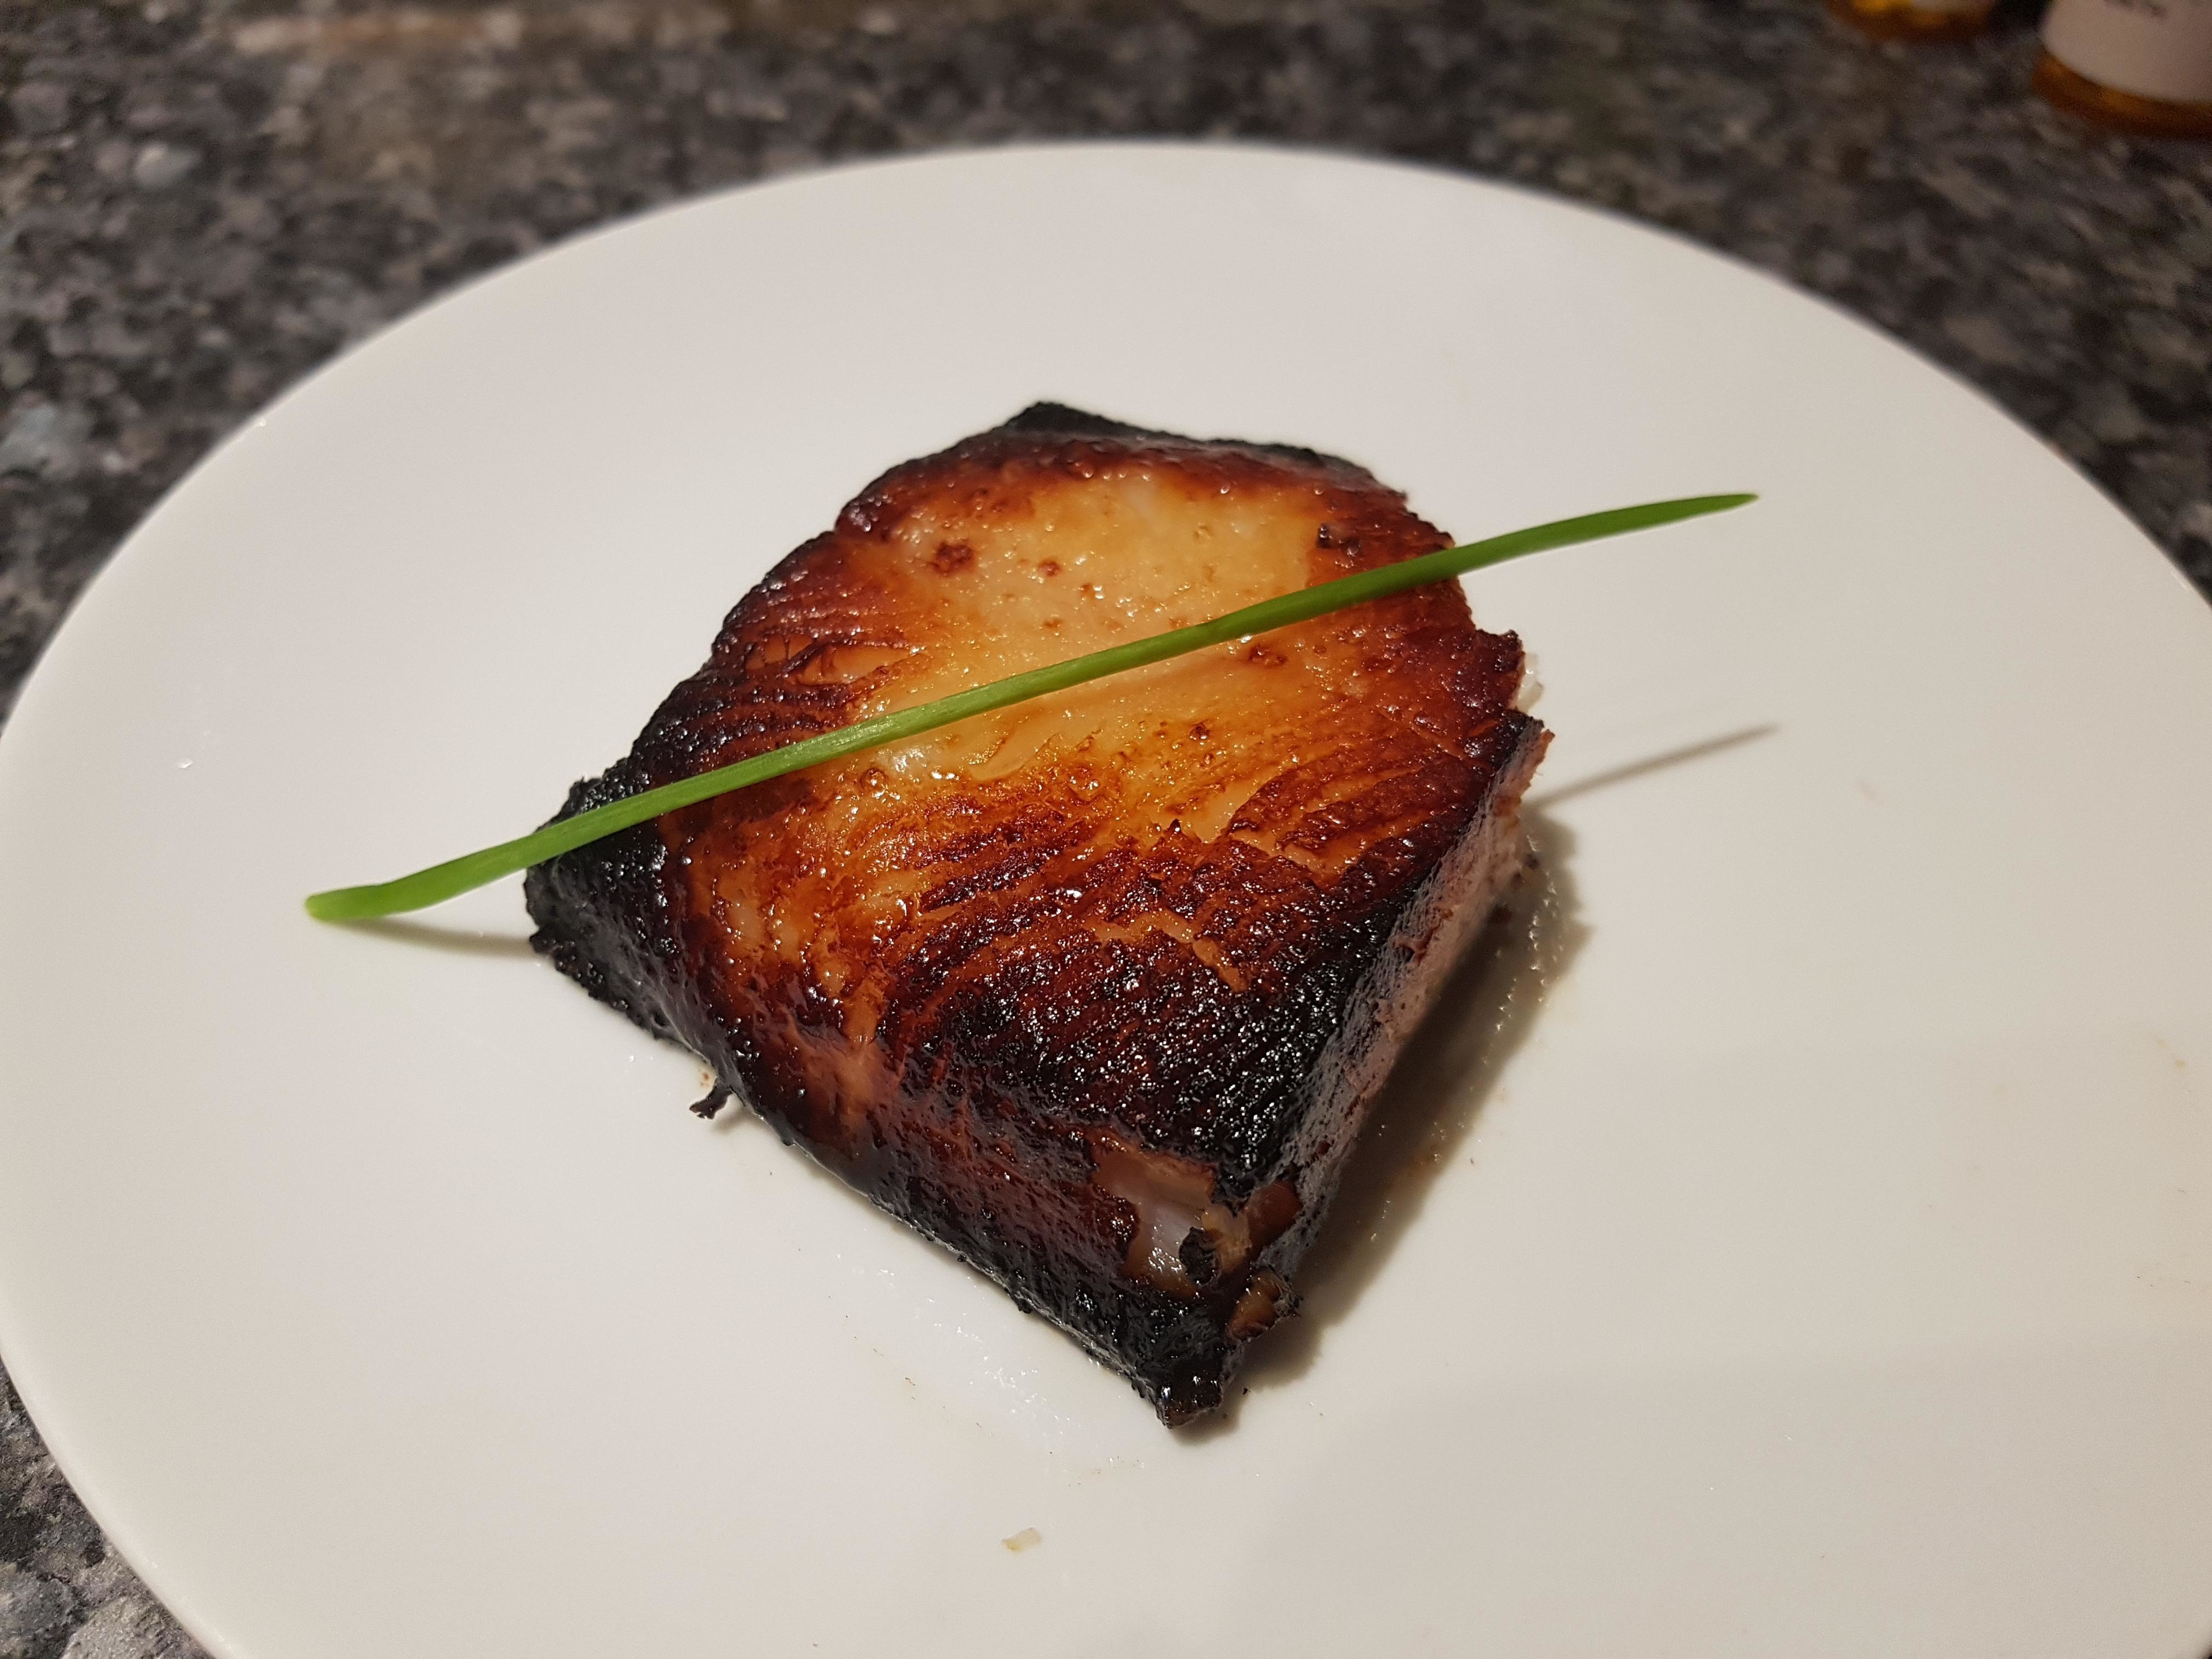 Seared pork belly slice on a white plate garnished with a green onion